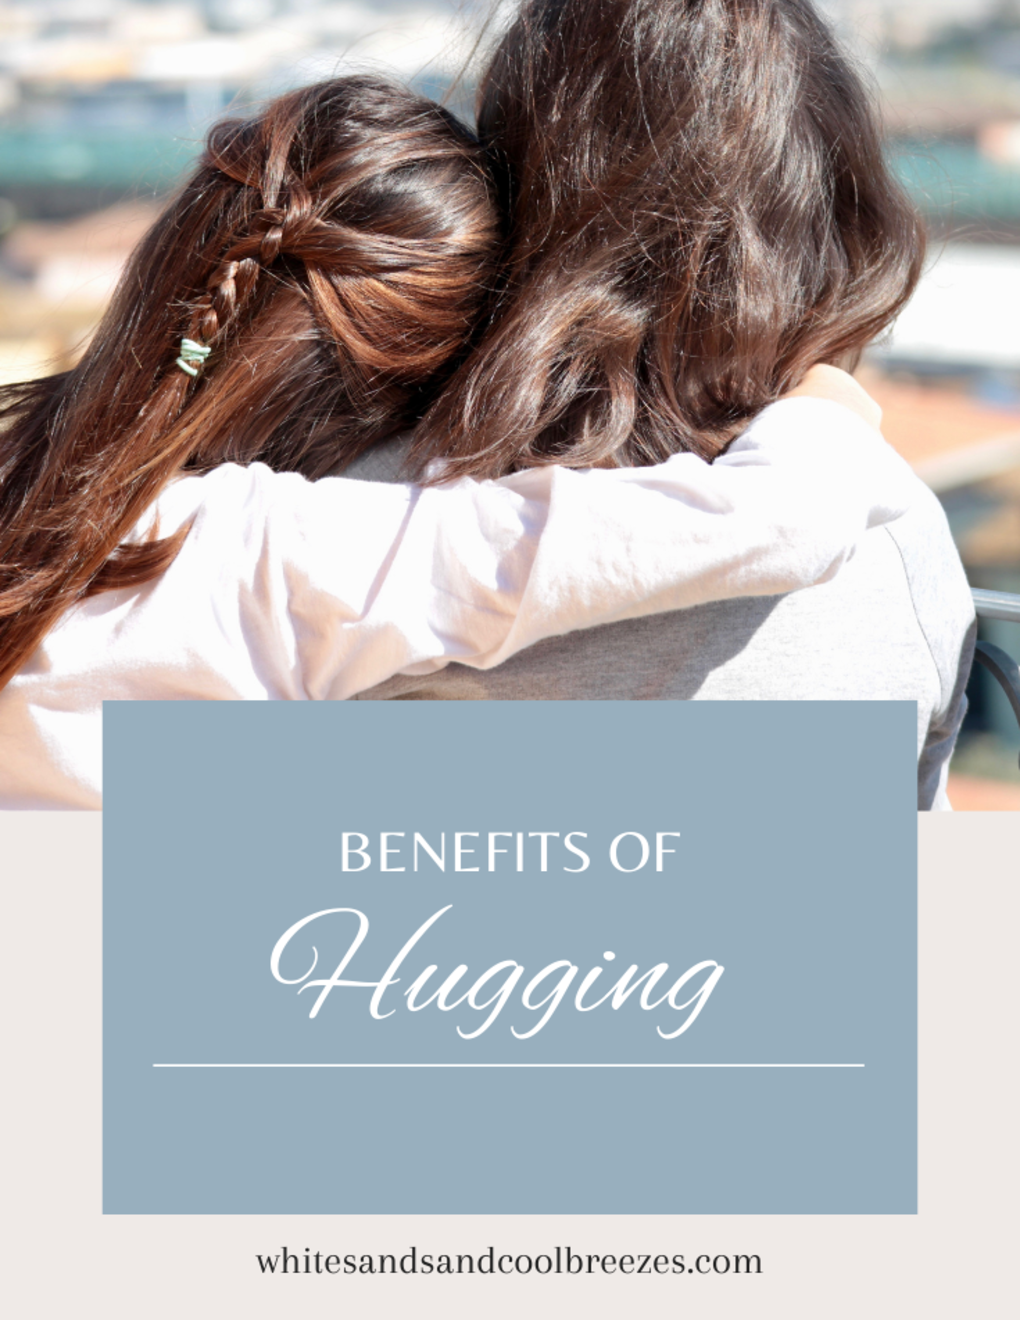 6 Benefits Of Hugging That Will Fascinate You